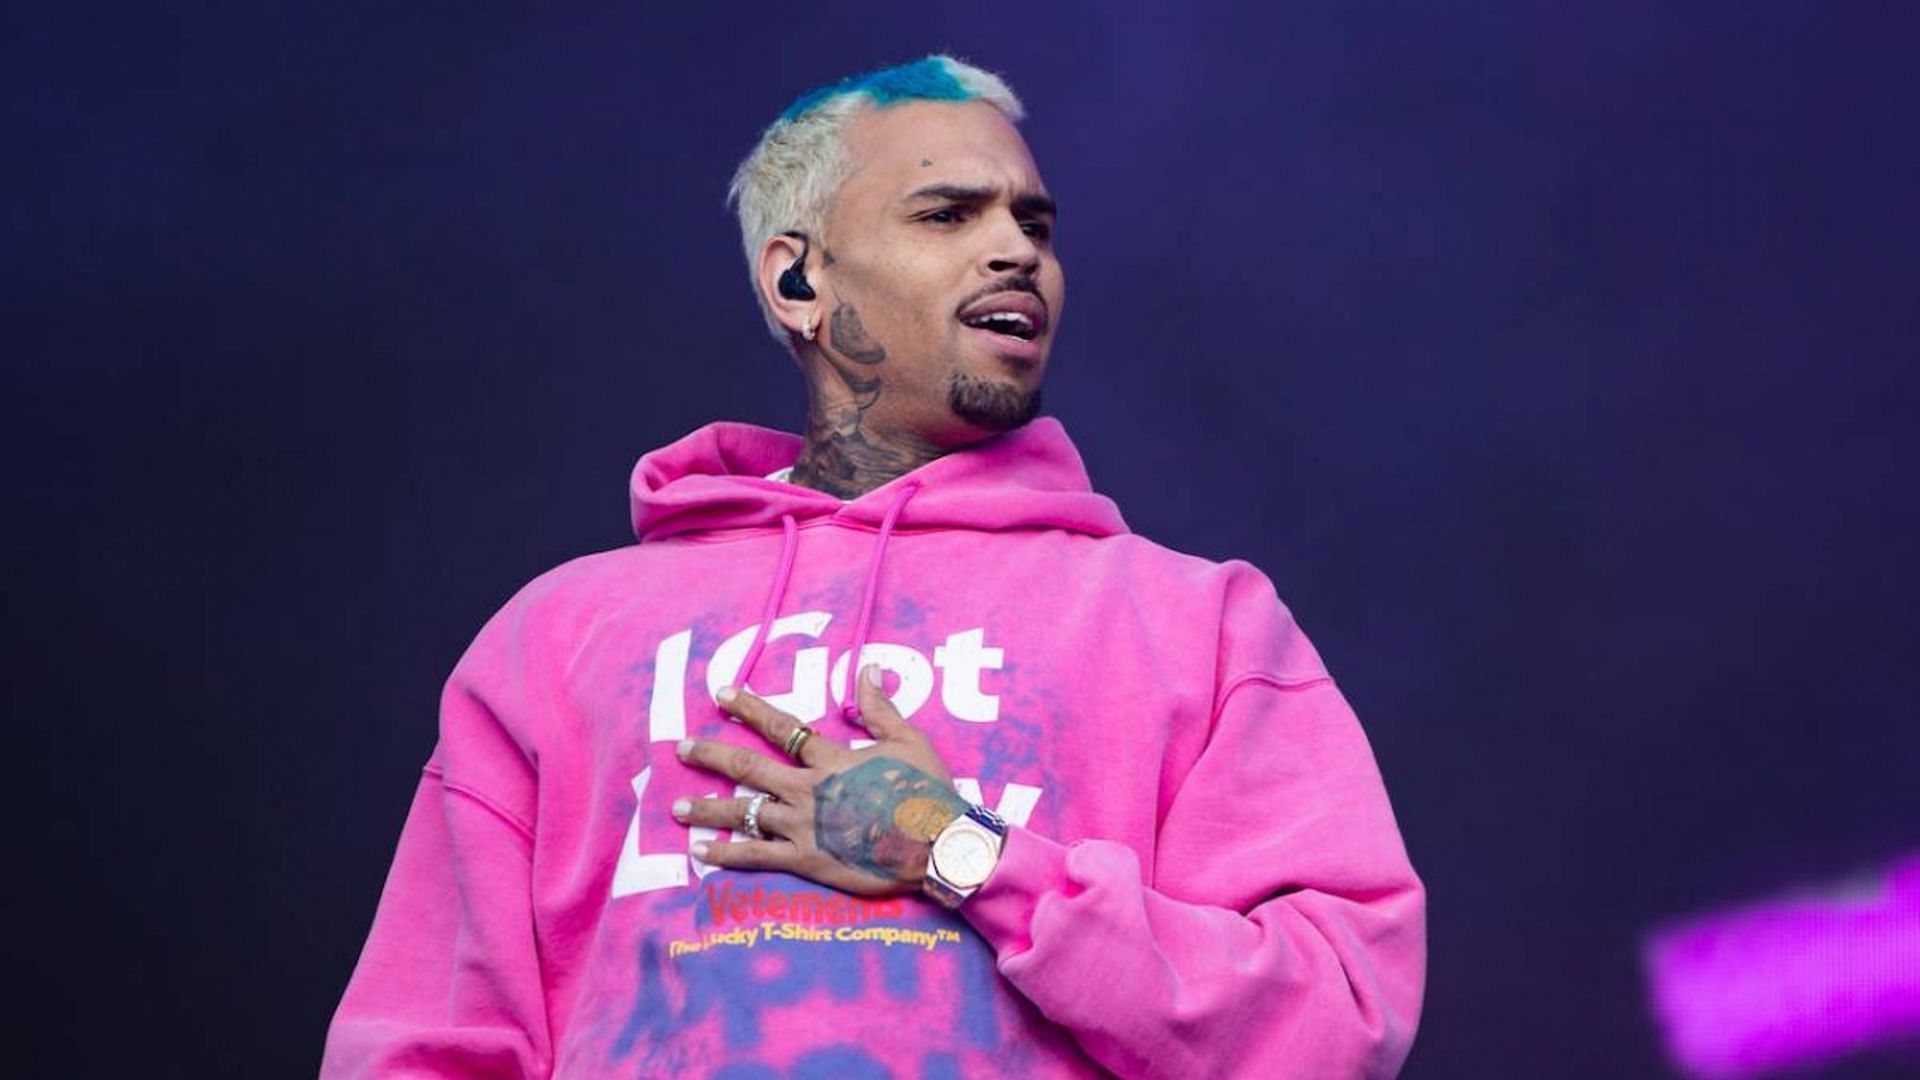 Chris Brown addresses inappropriate meet and greet photos (Image via Getty Images)